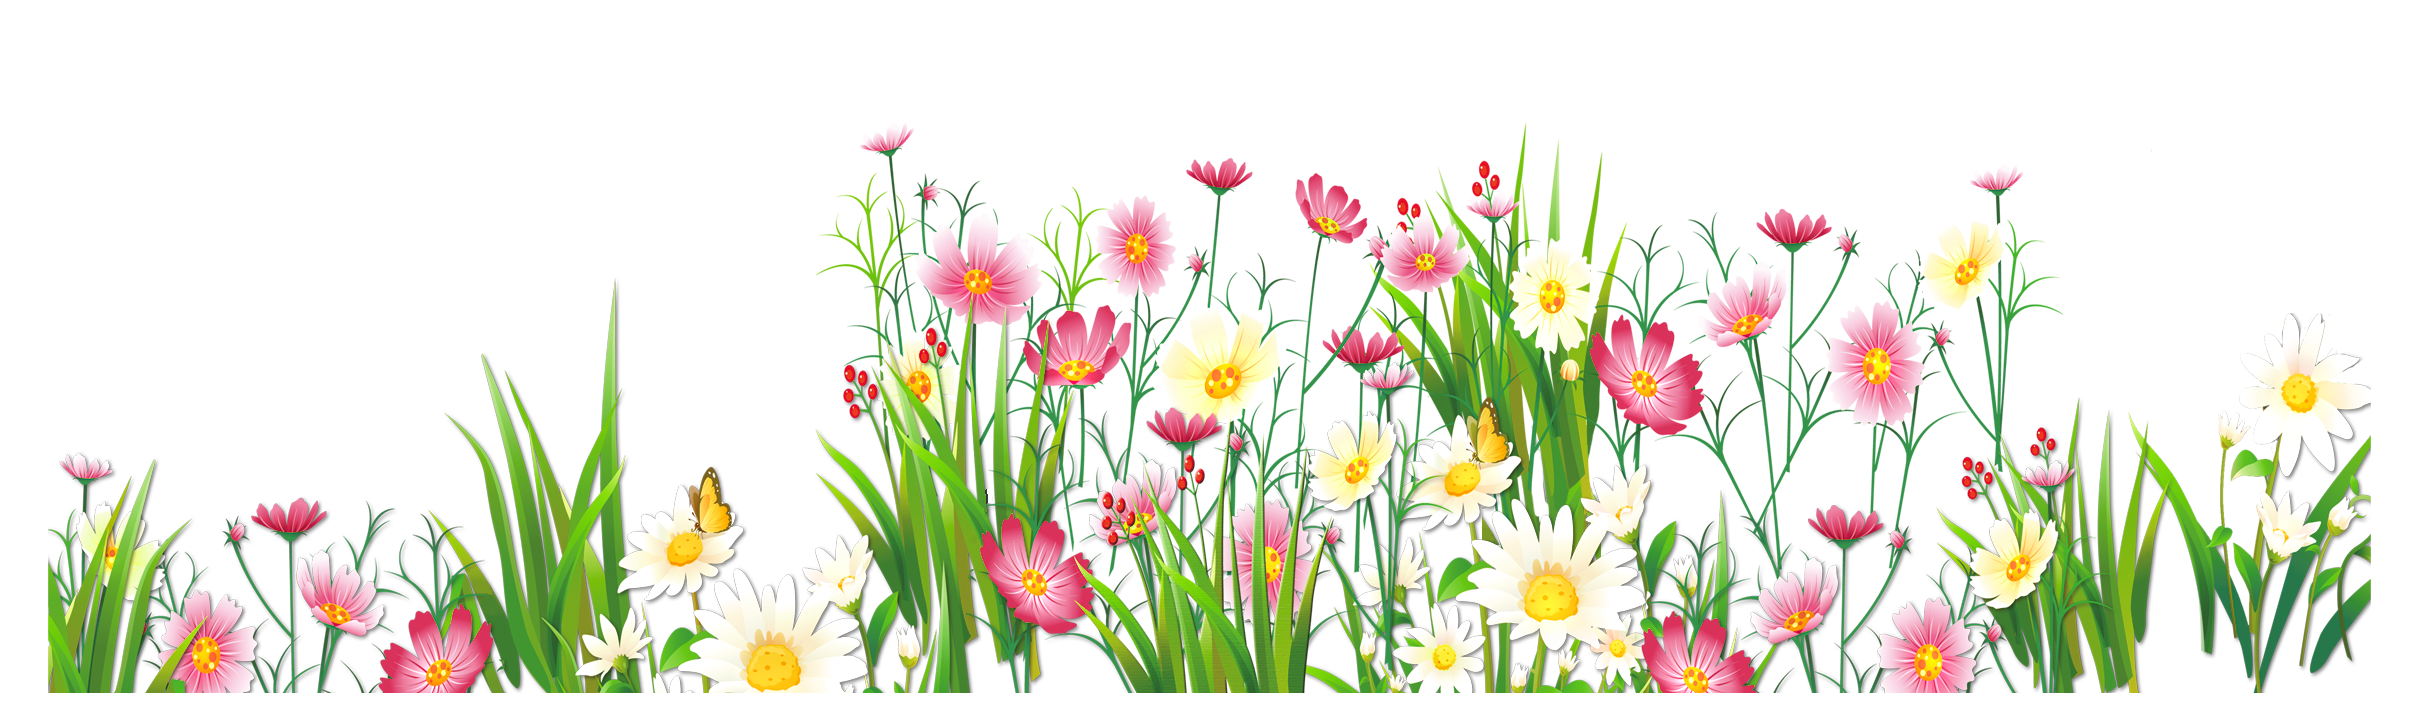 Flowers and Grass PNG Picture Clipart